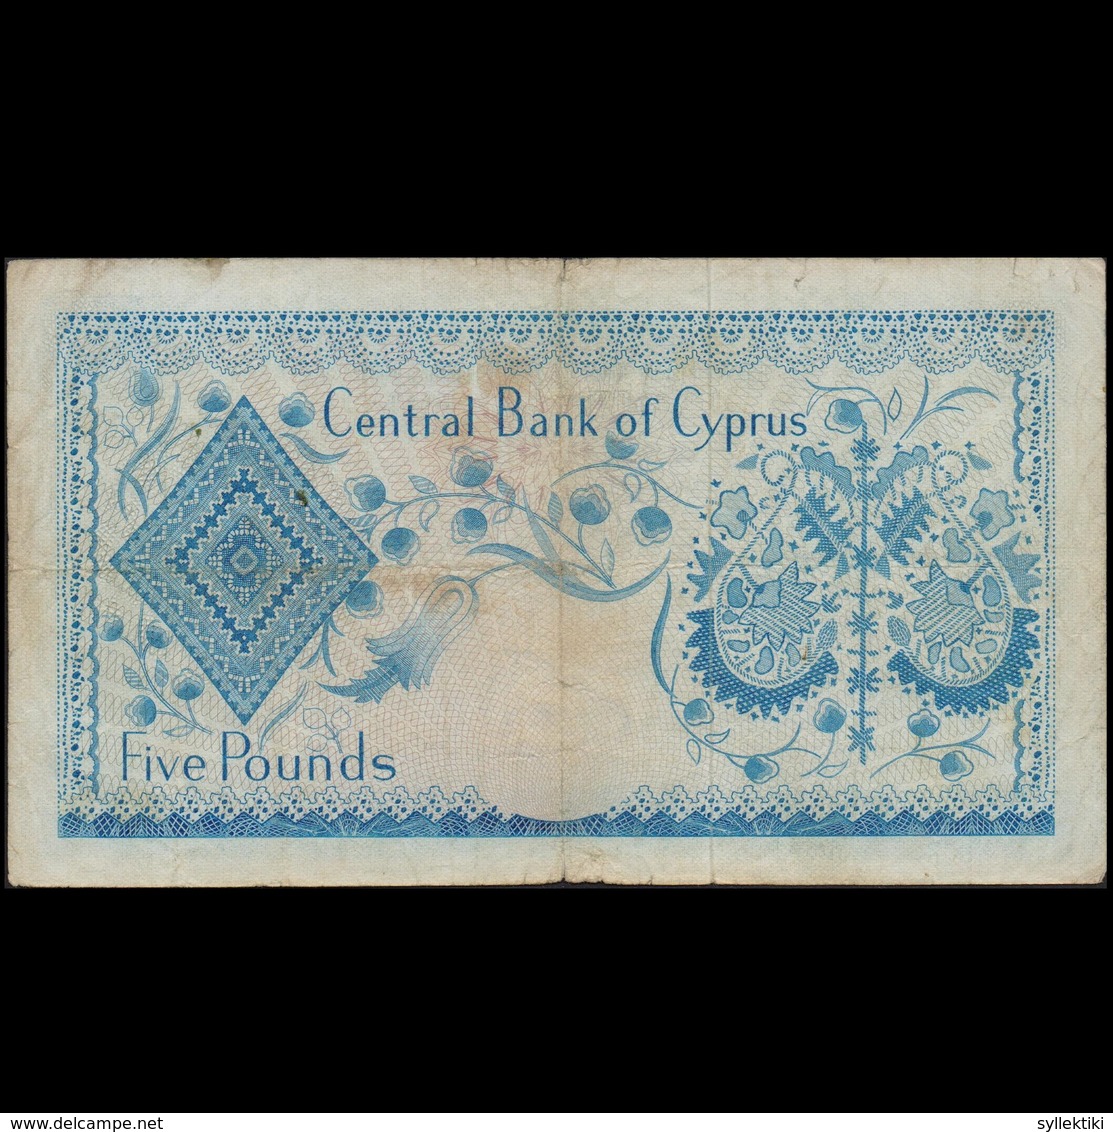 CYPRUS 1969 FIVE POUNDS BANKNOTE F+ - Cyprus